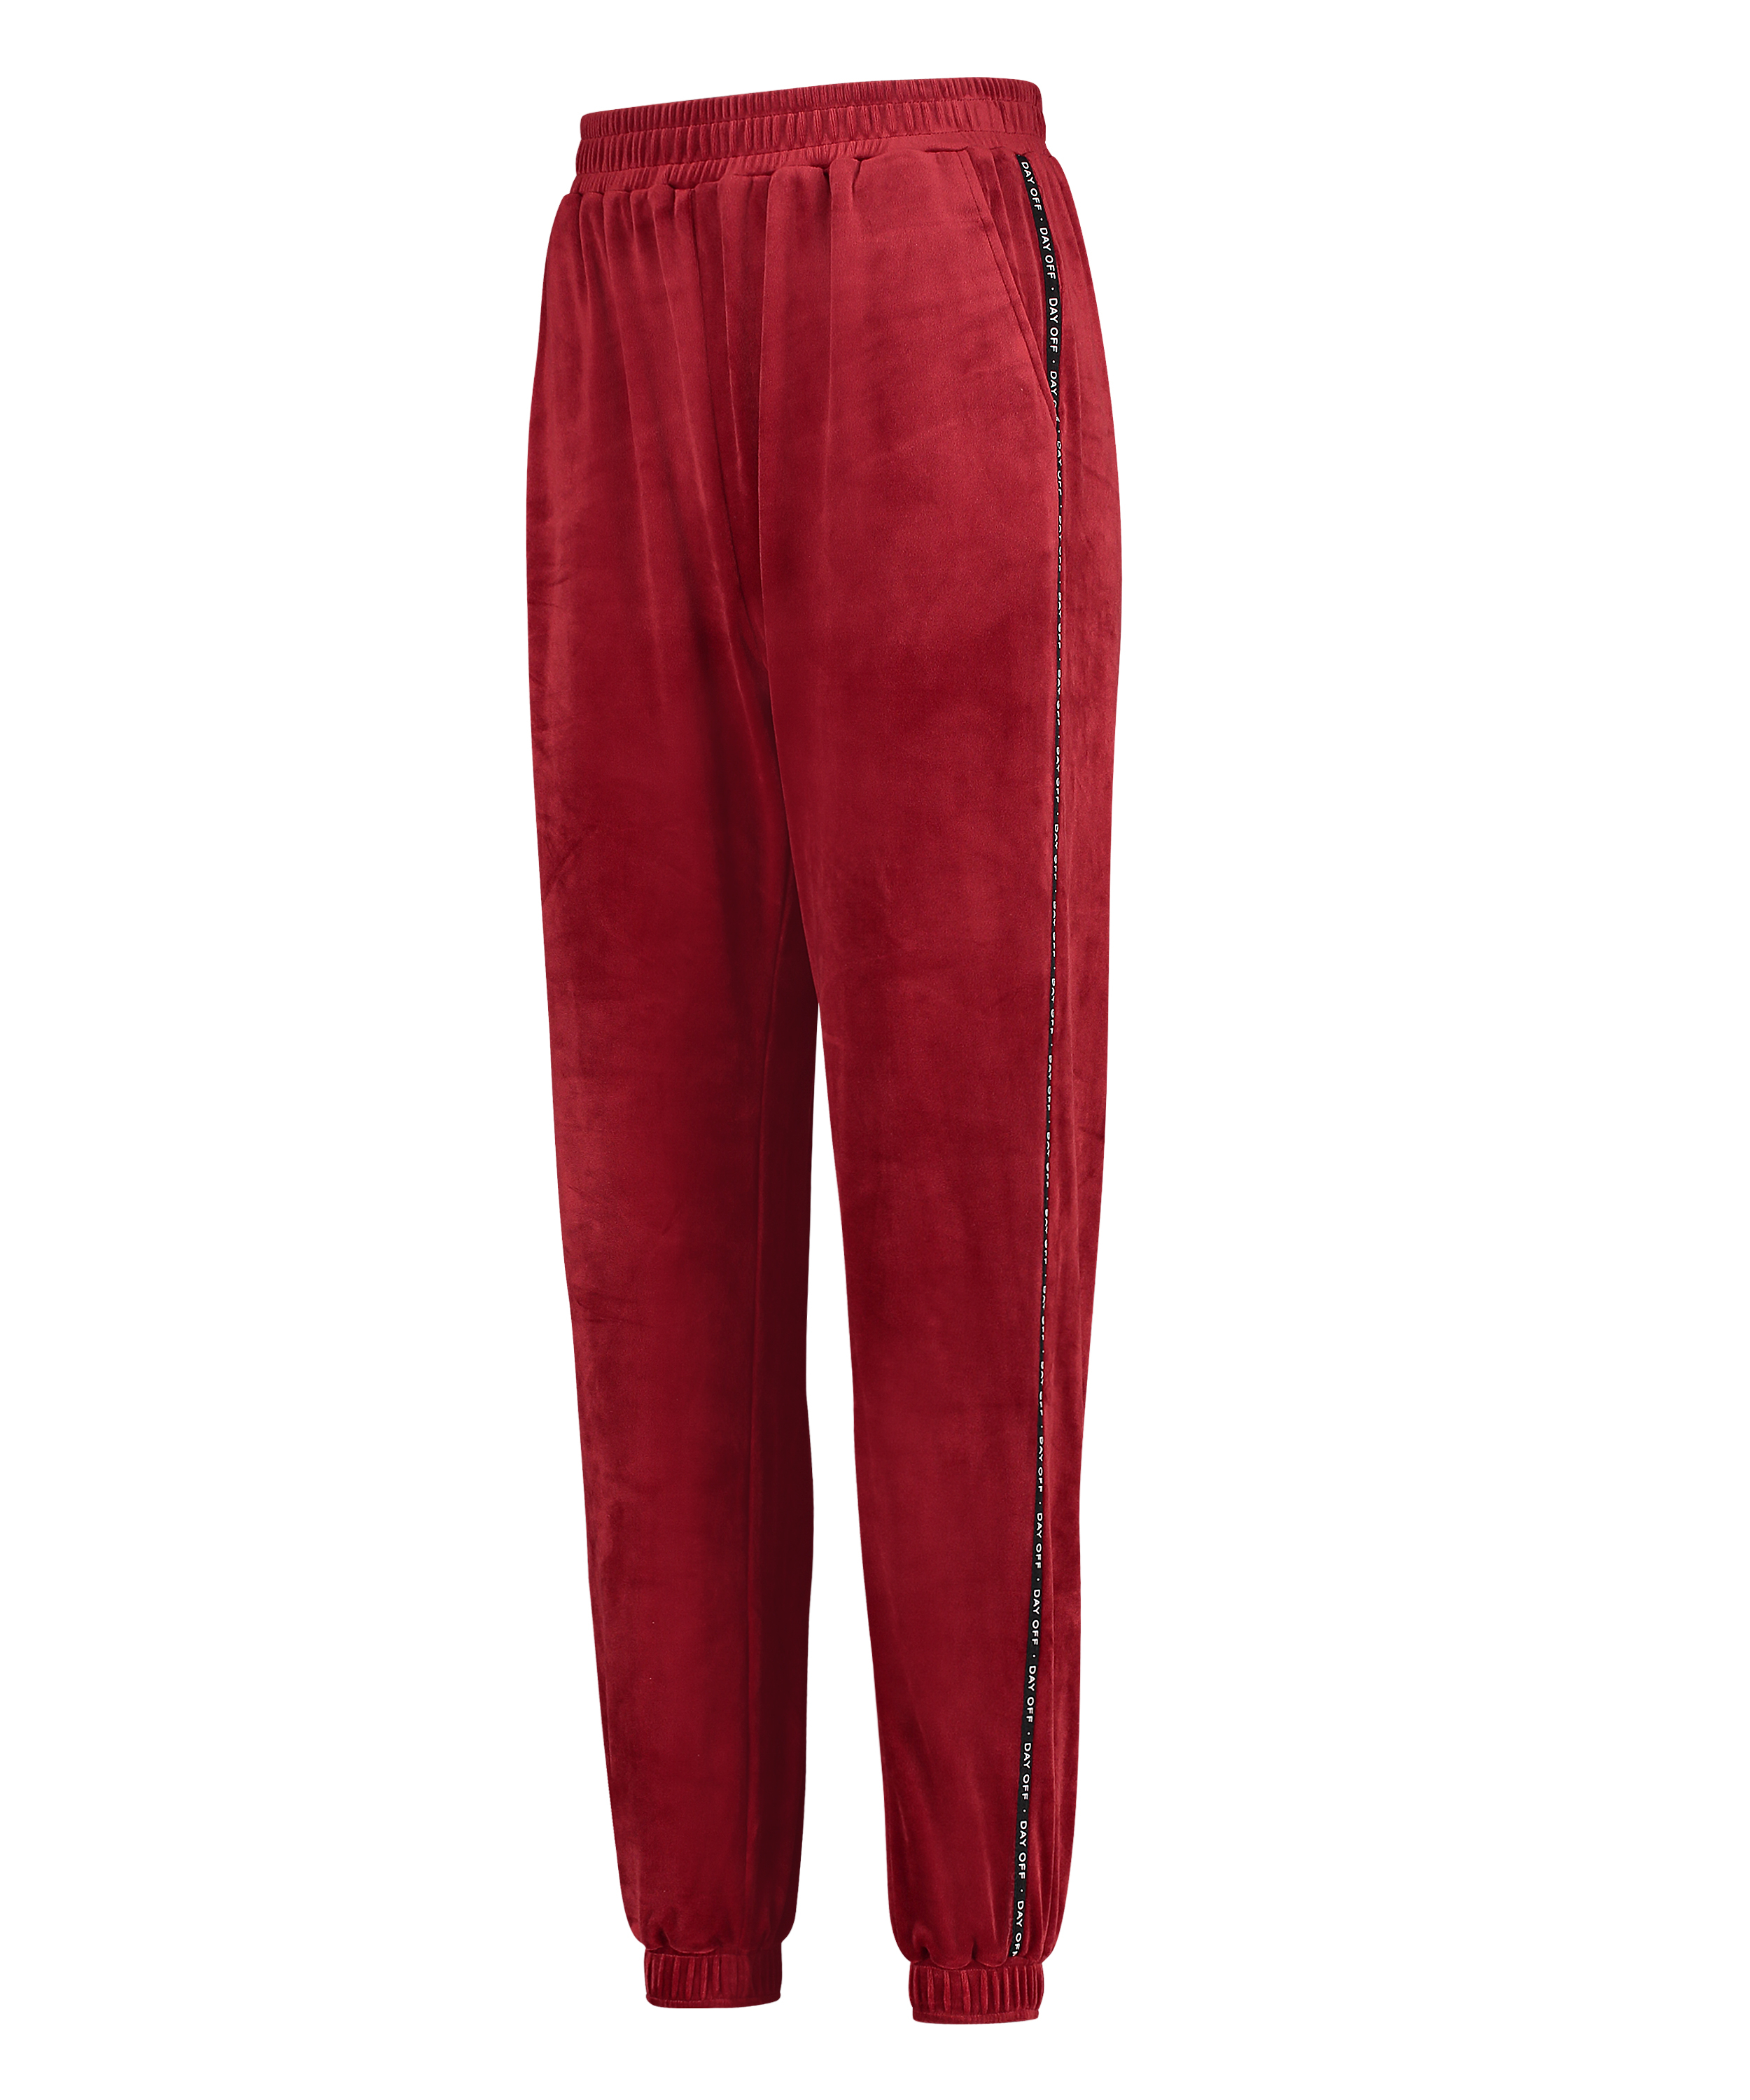 Tall Loosefit Velour Jogging Bottoms, Red, main